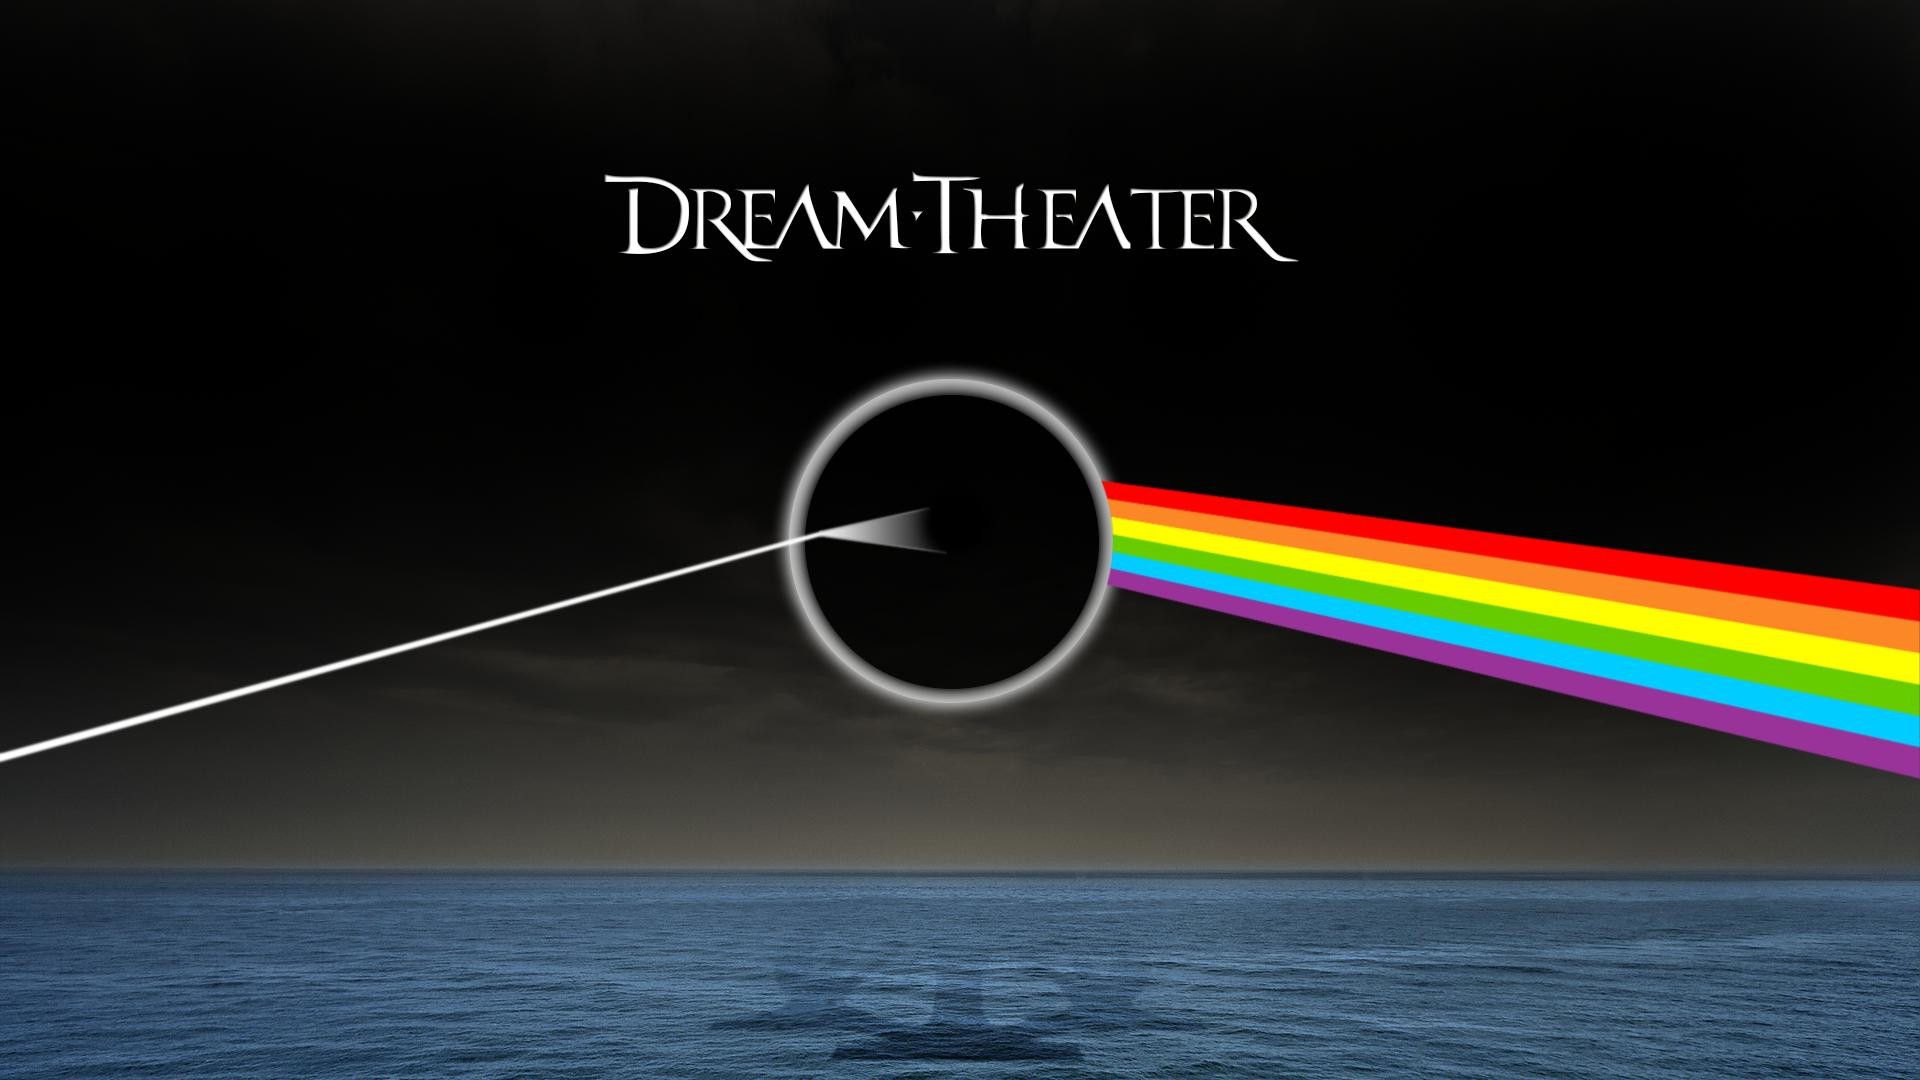 I have created a wallpaper with a Pink Floyd / Dream Theater crossover. Tell me what you think